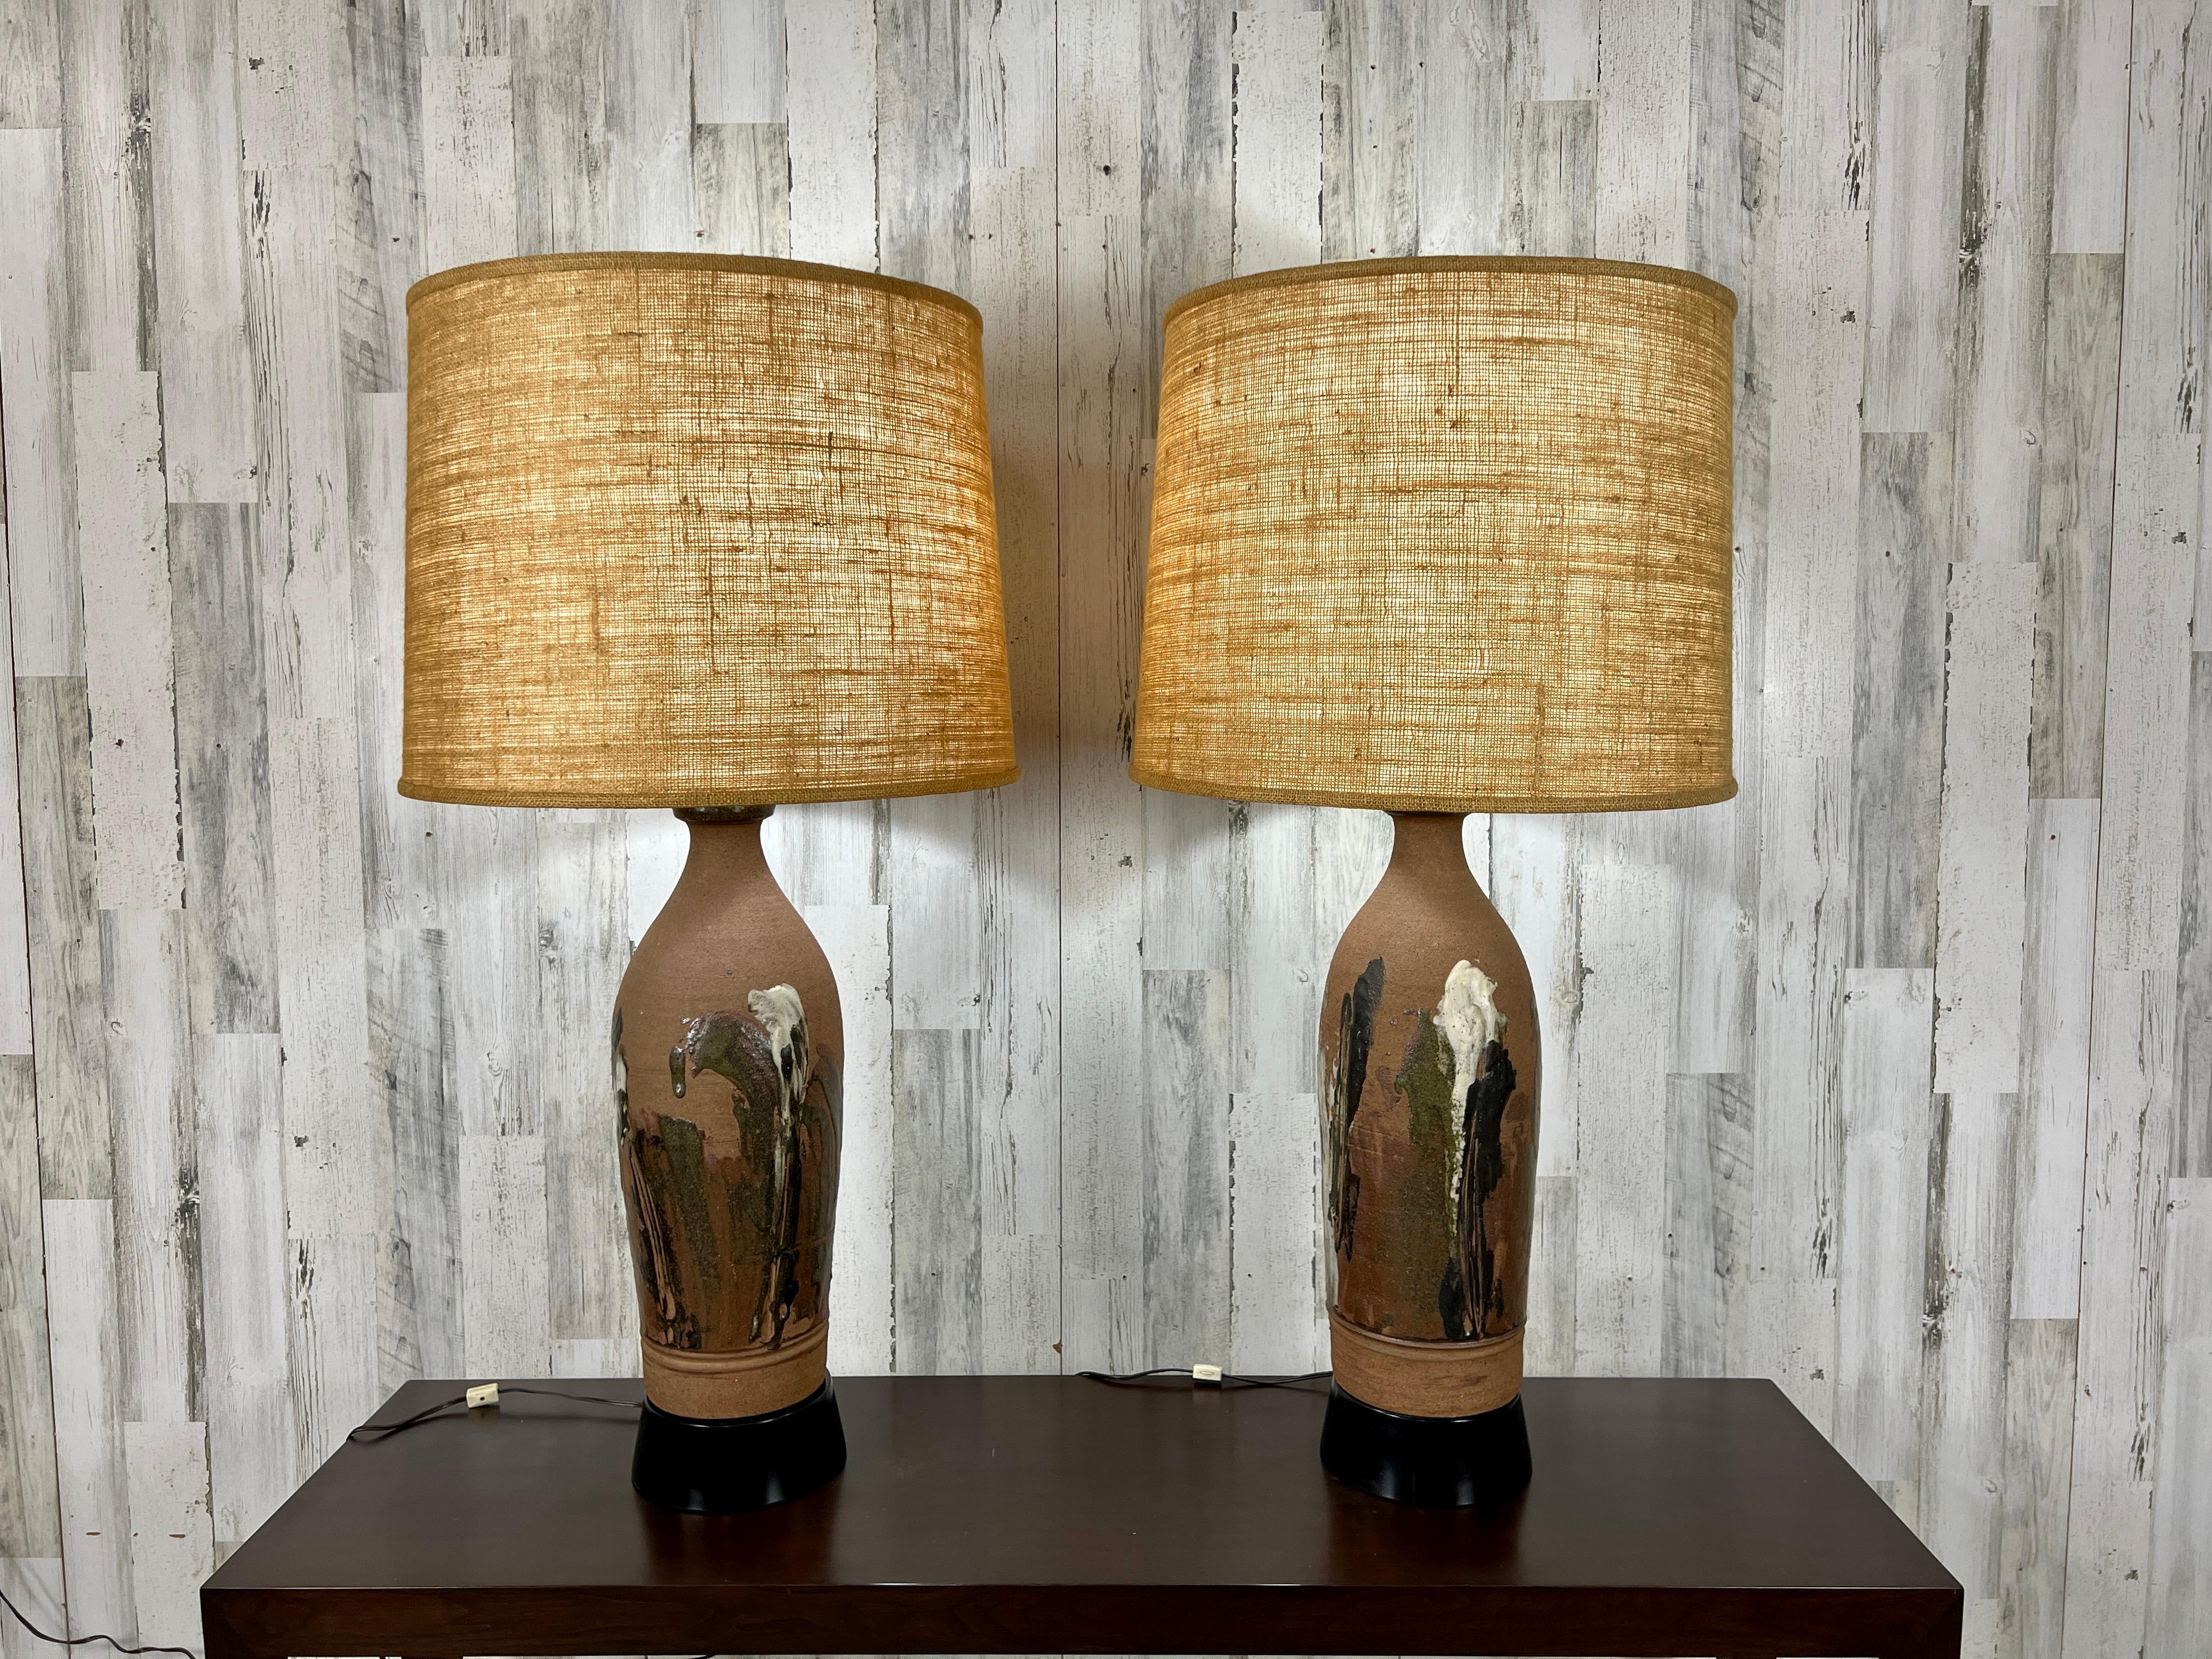 Studio crafted stoneware vase shape with classic earth tone glaze by Larry Shep for Marbro lighting . The painted wood base and dual bulb fixture for maximum lighting. The lamps without the shade measures 8